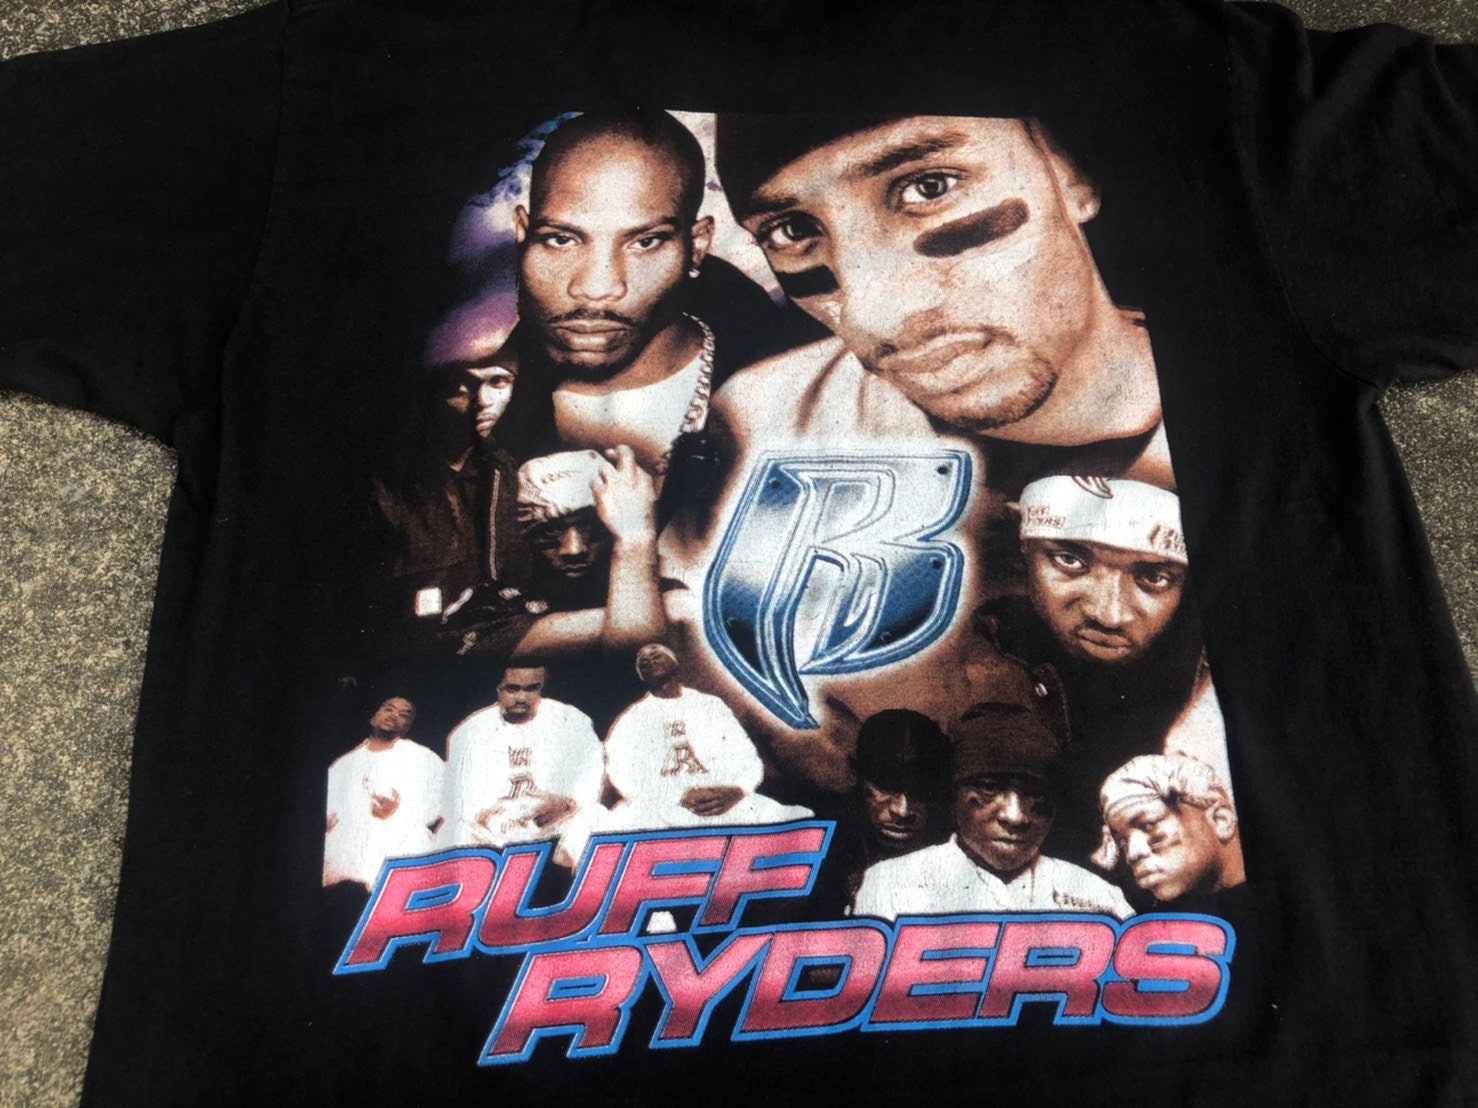 VTG DMX Ruff Ryders T-shirt Thrifted by 90s_tpt - Etsy